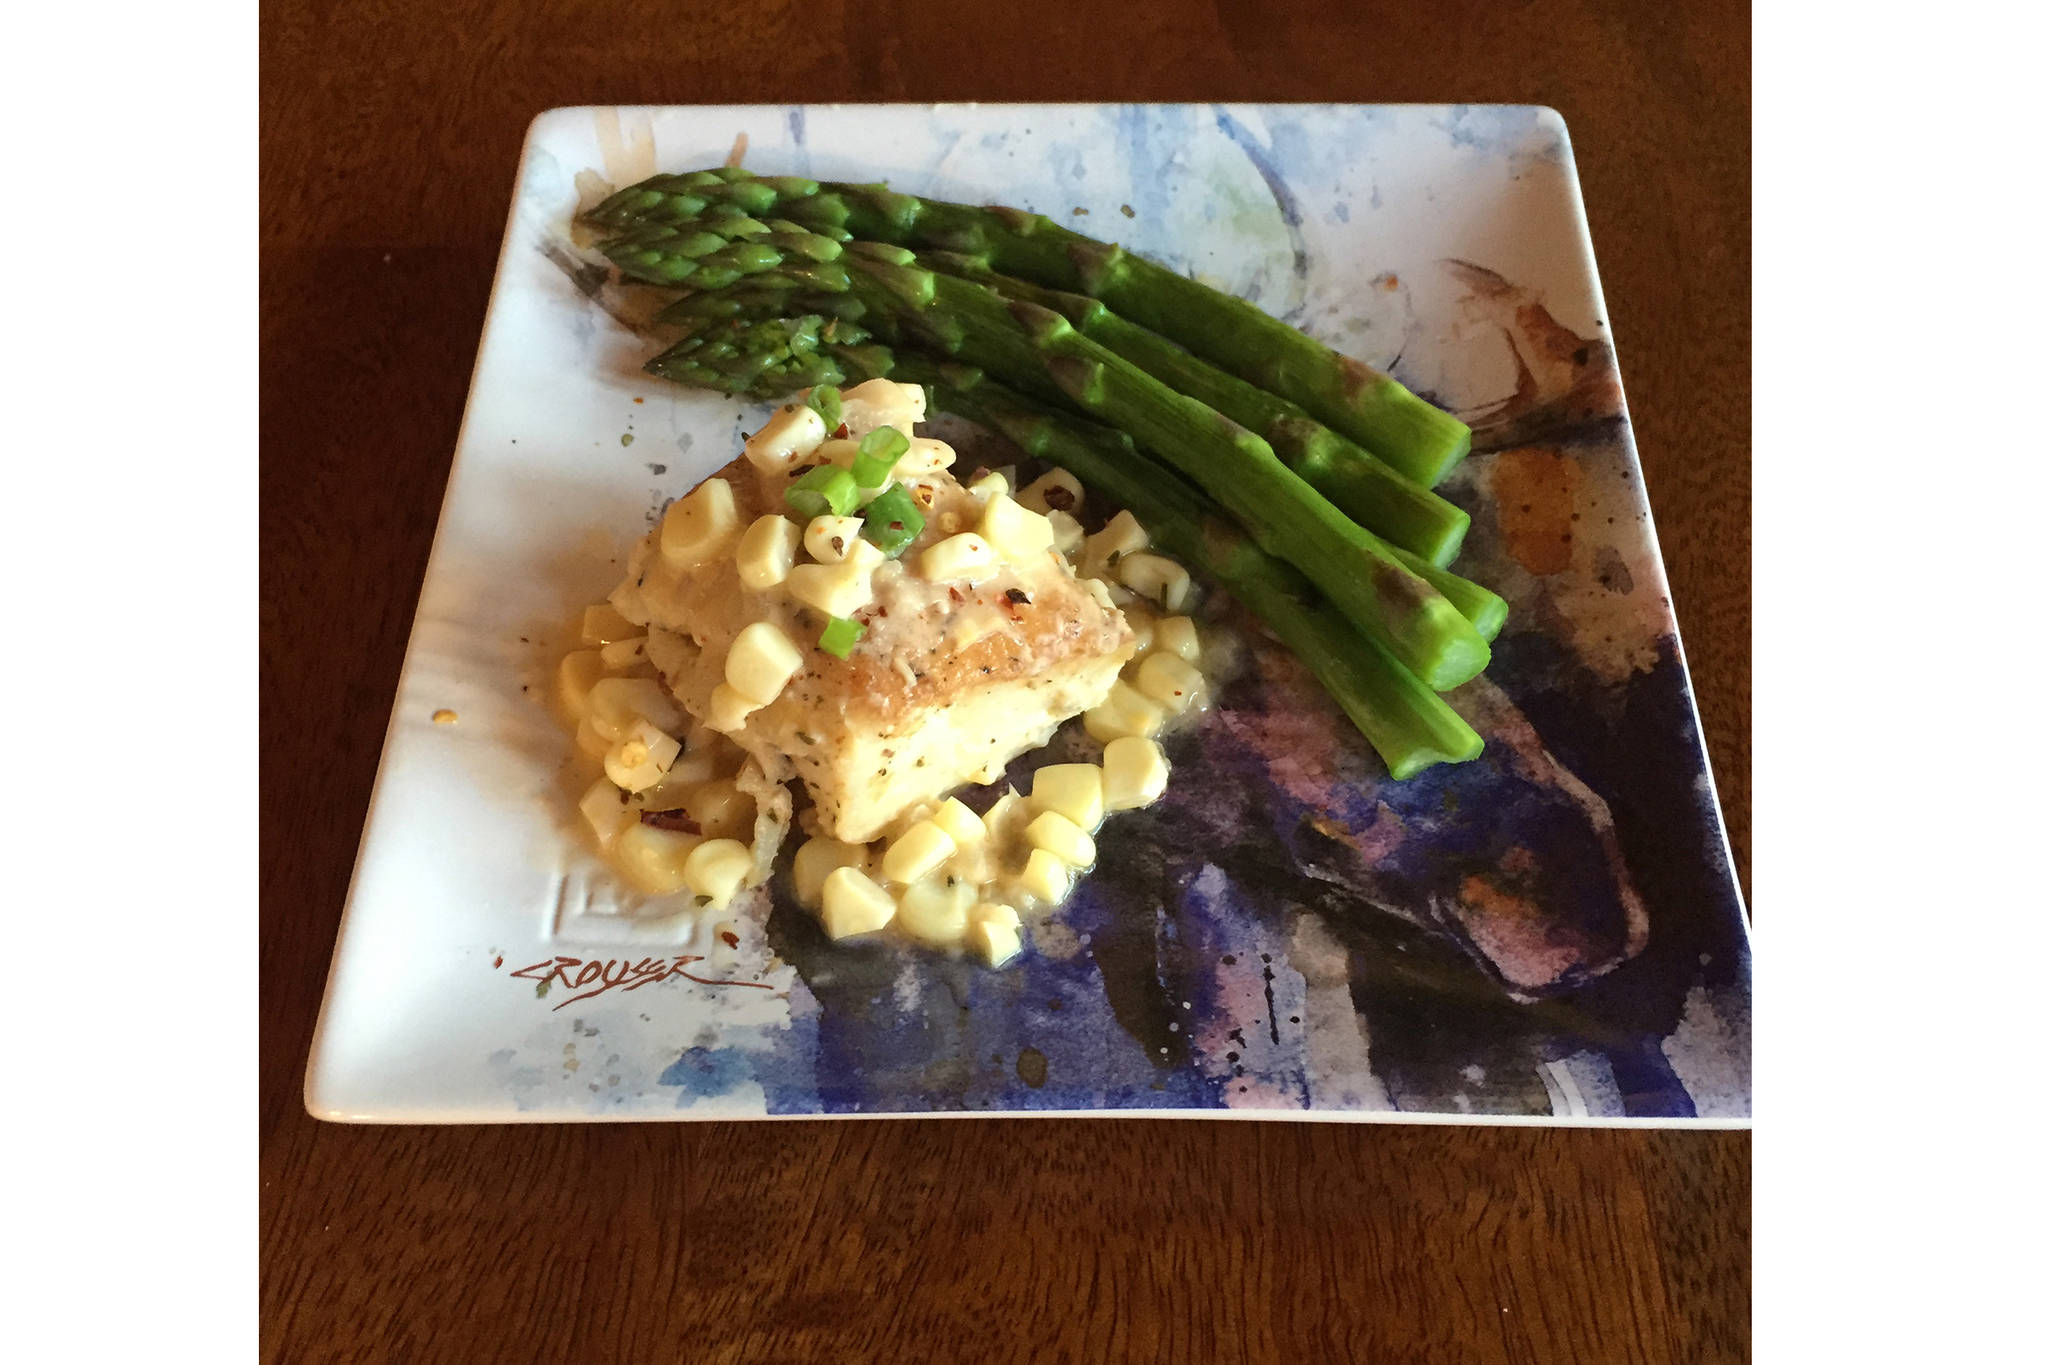 Corn in this recipe of roasted halibut with corn chardonnay butter sauce complements the taste of halibut, as prepared here on June 25, 2019, in Teri Robl’s kitchen in Homer, Alaska. (Photo by Teri Robl)